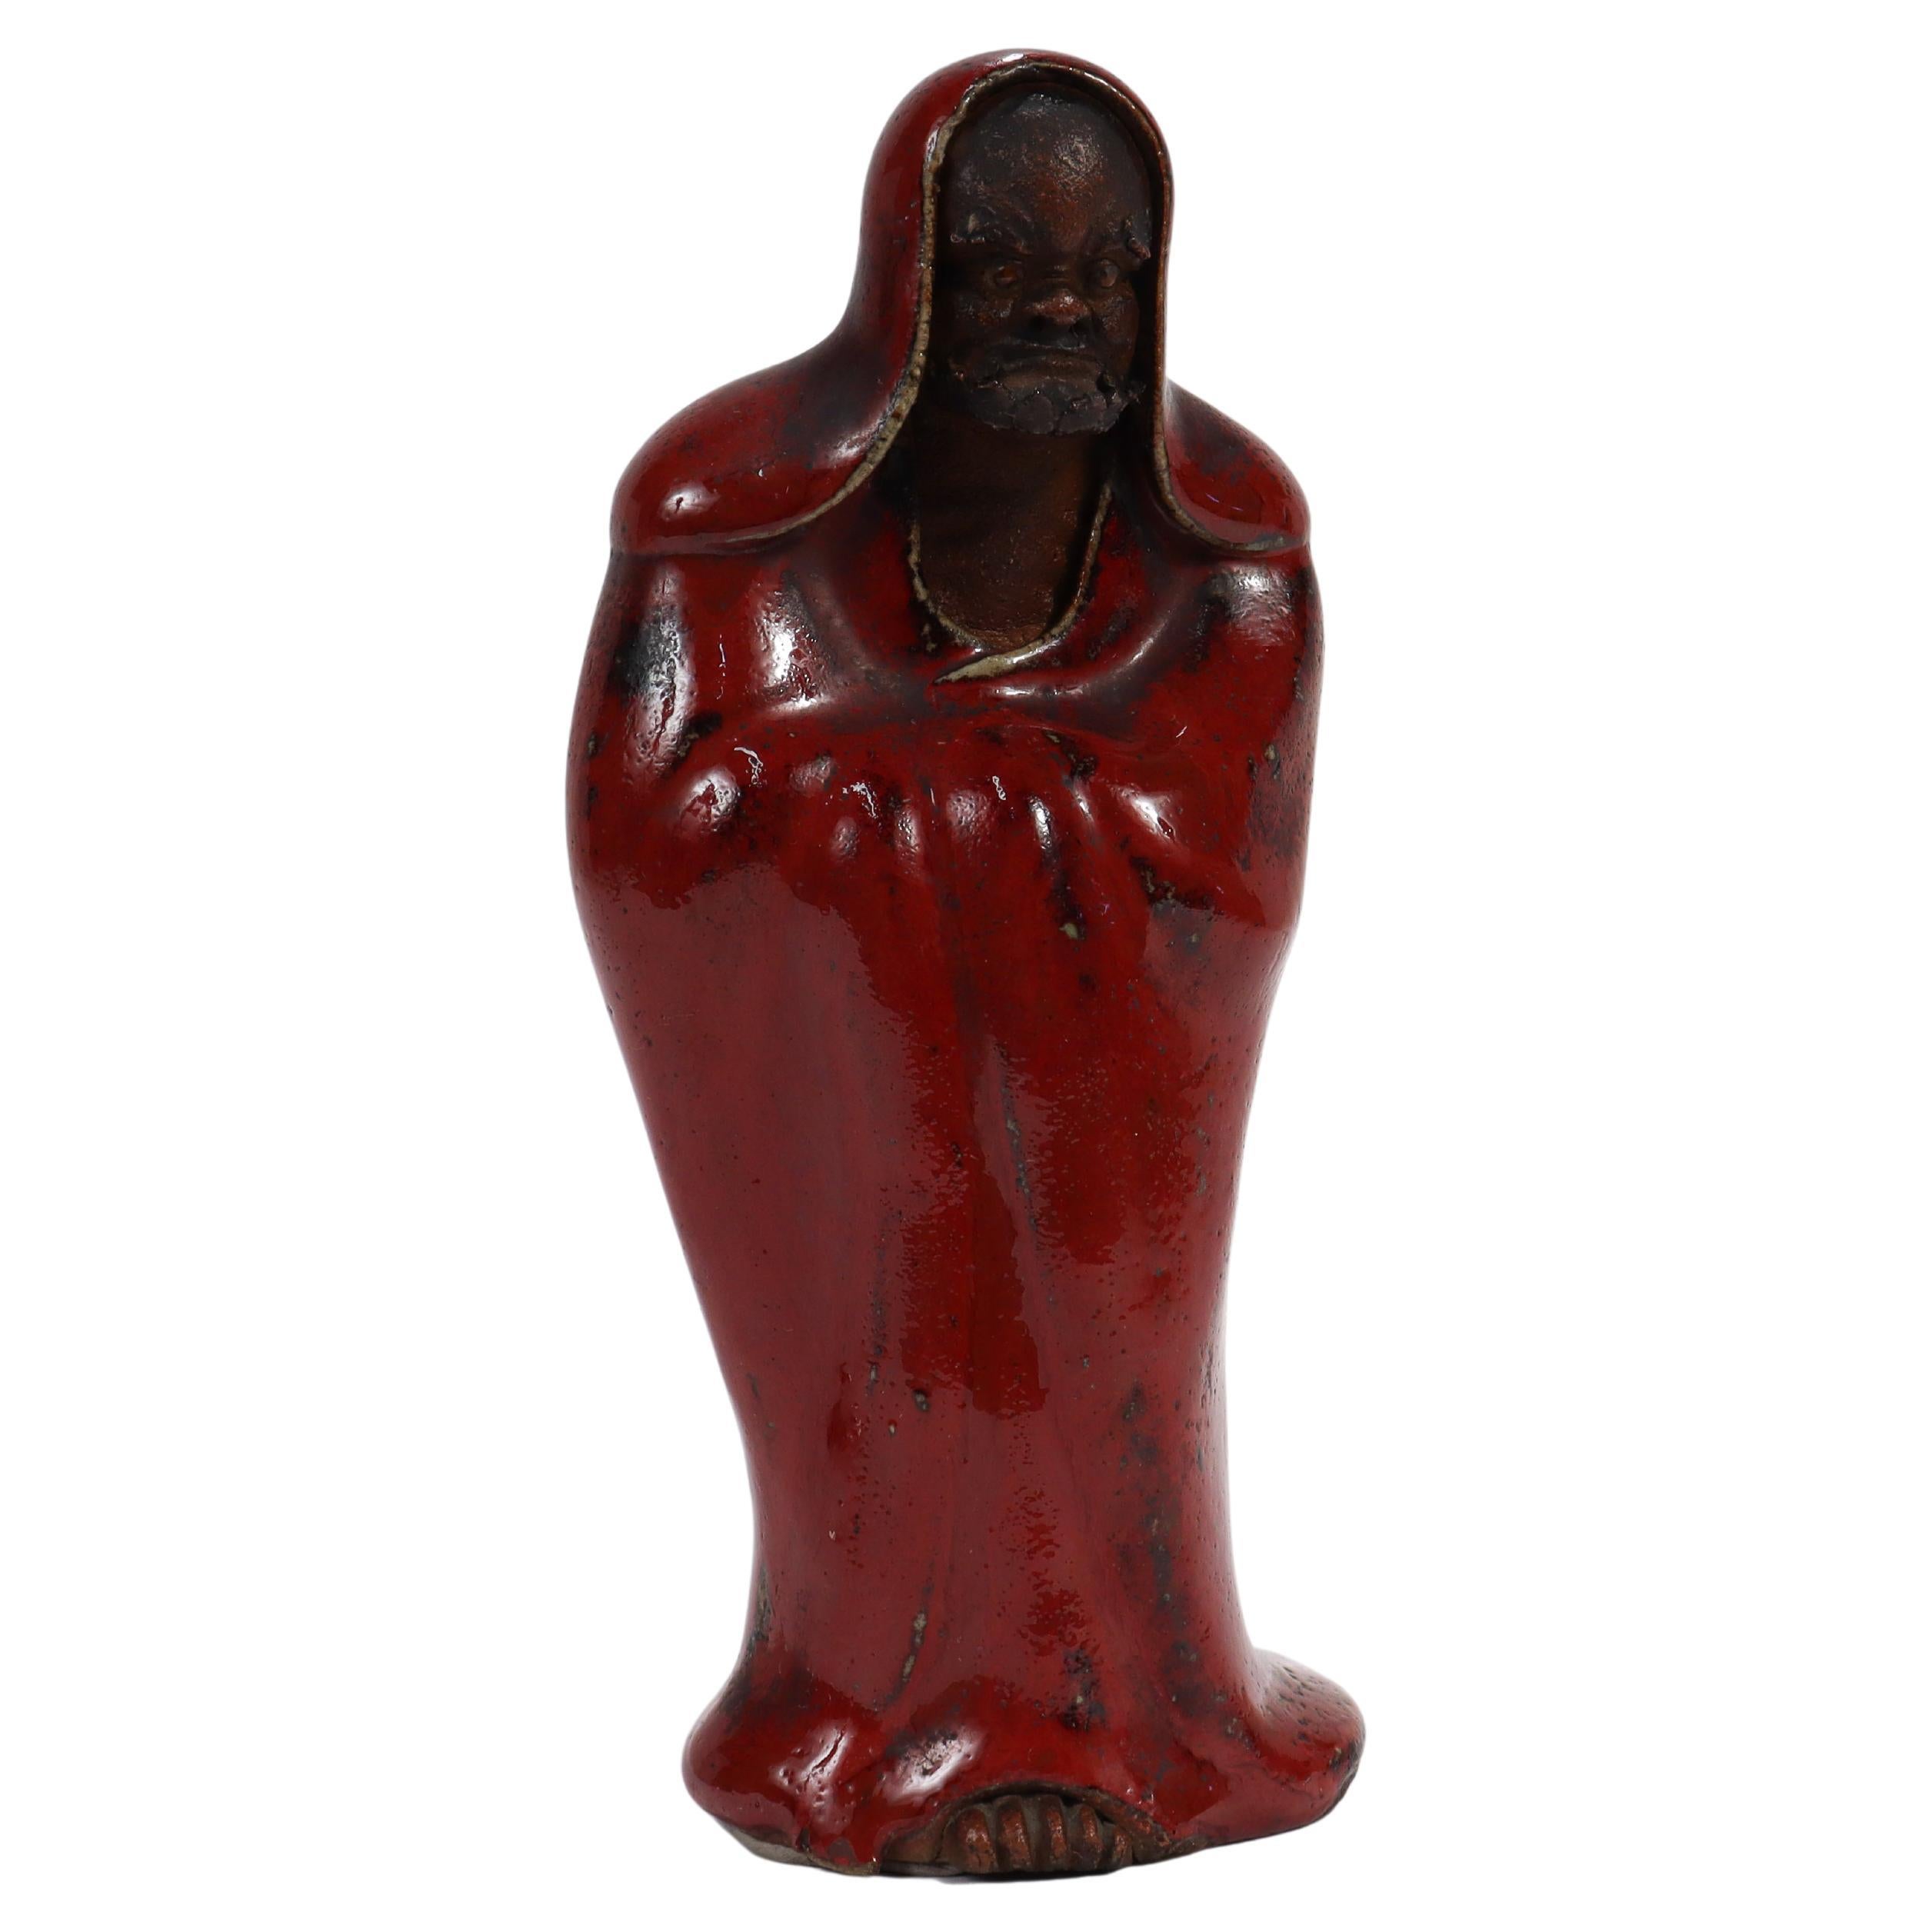 An fine, antique Japanese pottery Daruma figurine.

In the form of a Daruma, a depiction of Bodhidharma the semi-legendary founder of Zen/Chan Buddhism.

The figure's face and protruding toes are an unglazed dark brown and his robe has a dark red